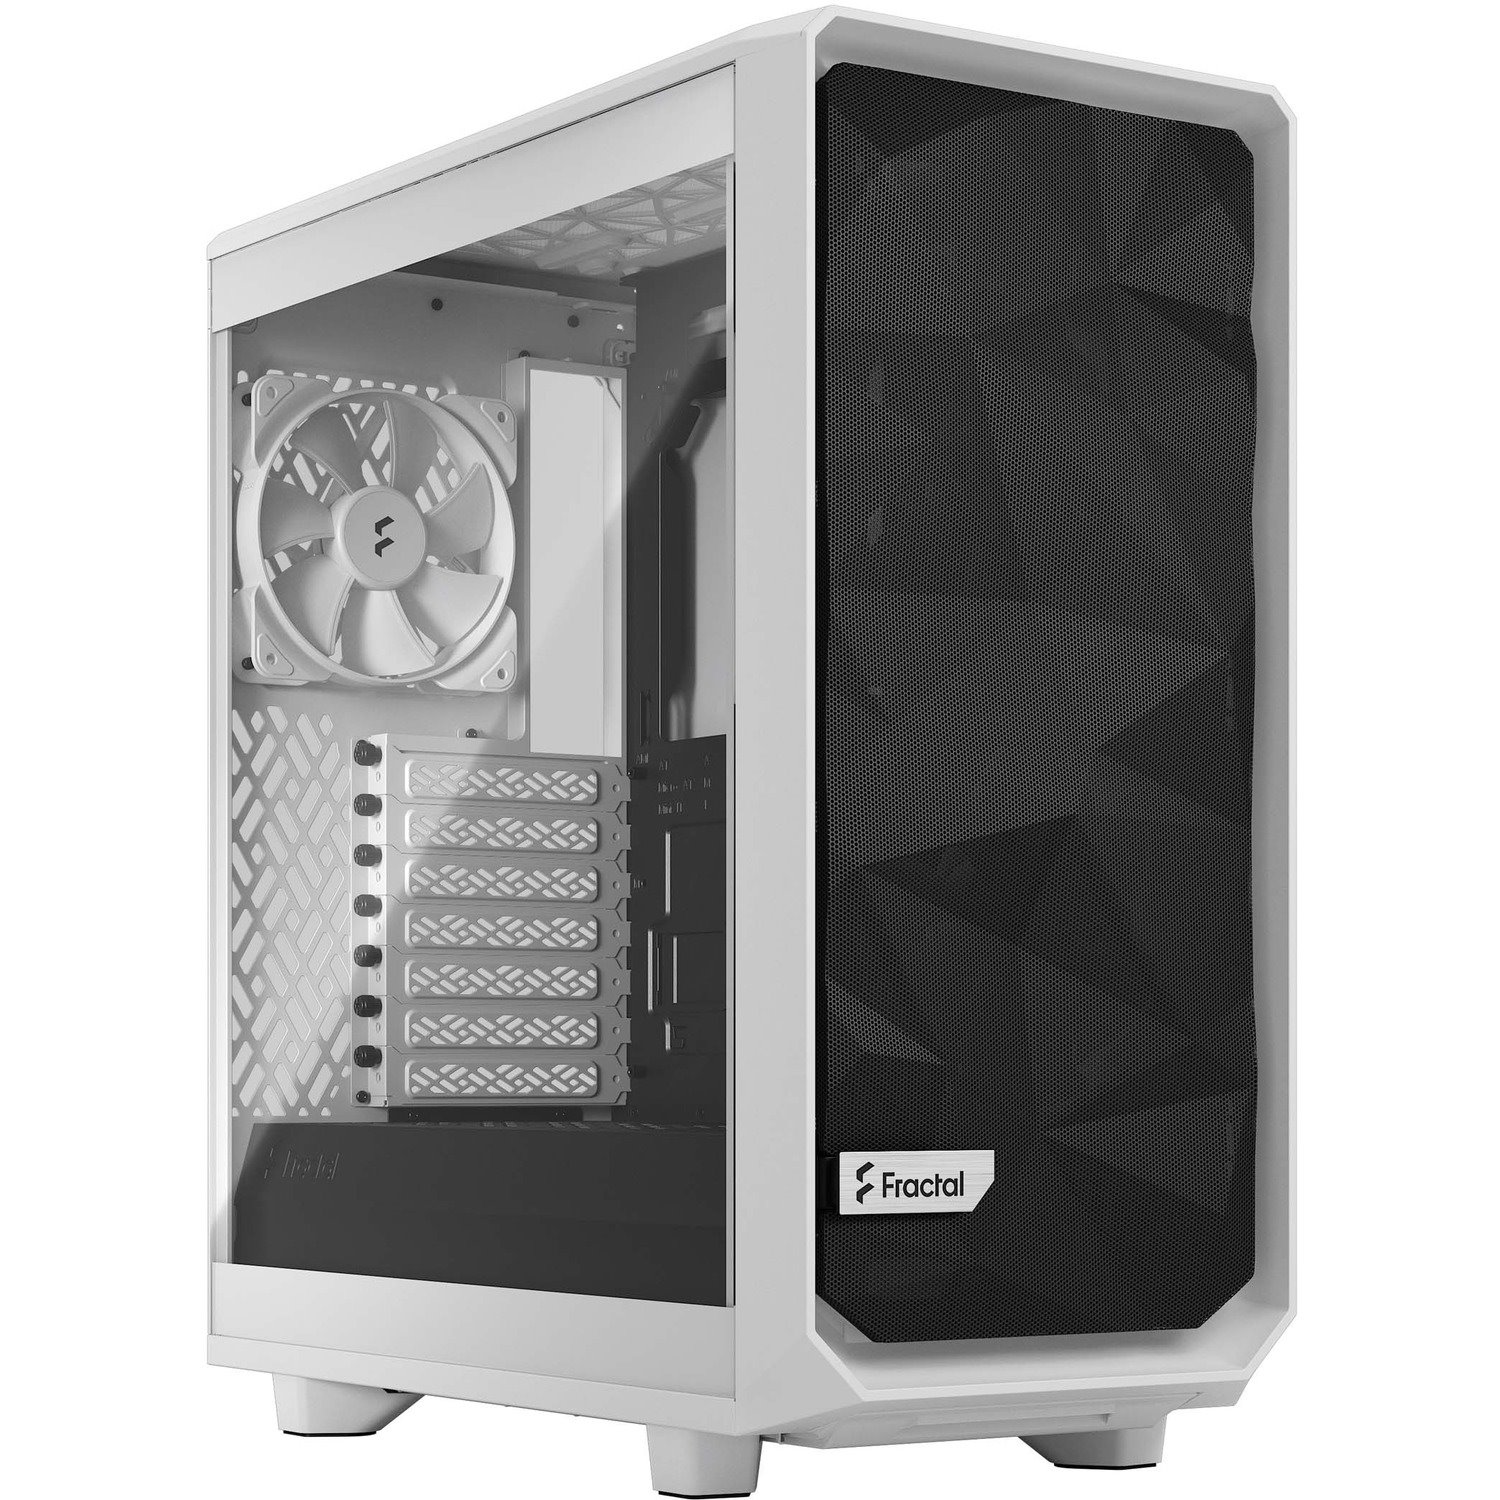 Fractal Design Meshify 2 Compact Lite Computer Case - ATX Motherboard Supported - Mid-tower - Tempered Glass, Steel, Mesh - White